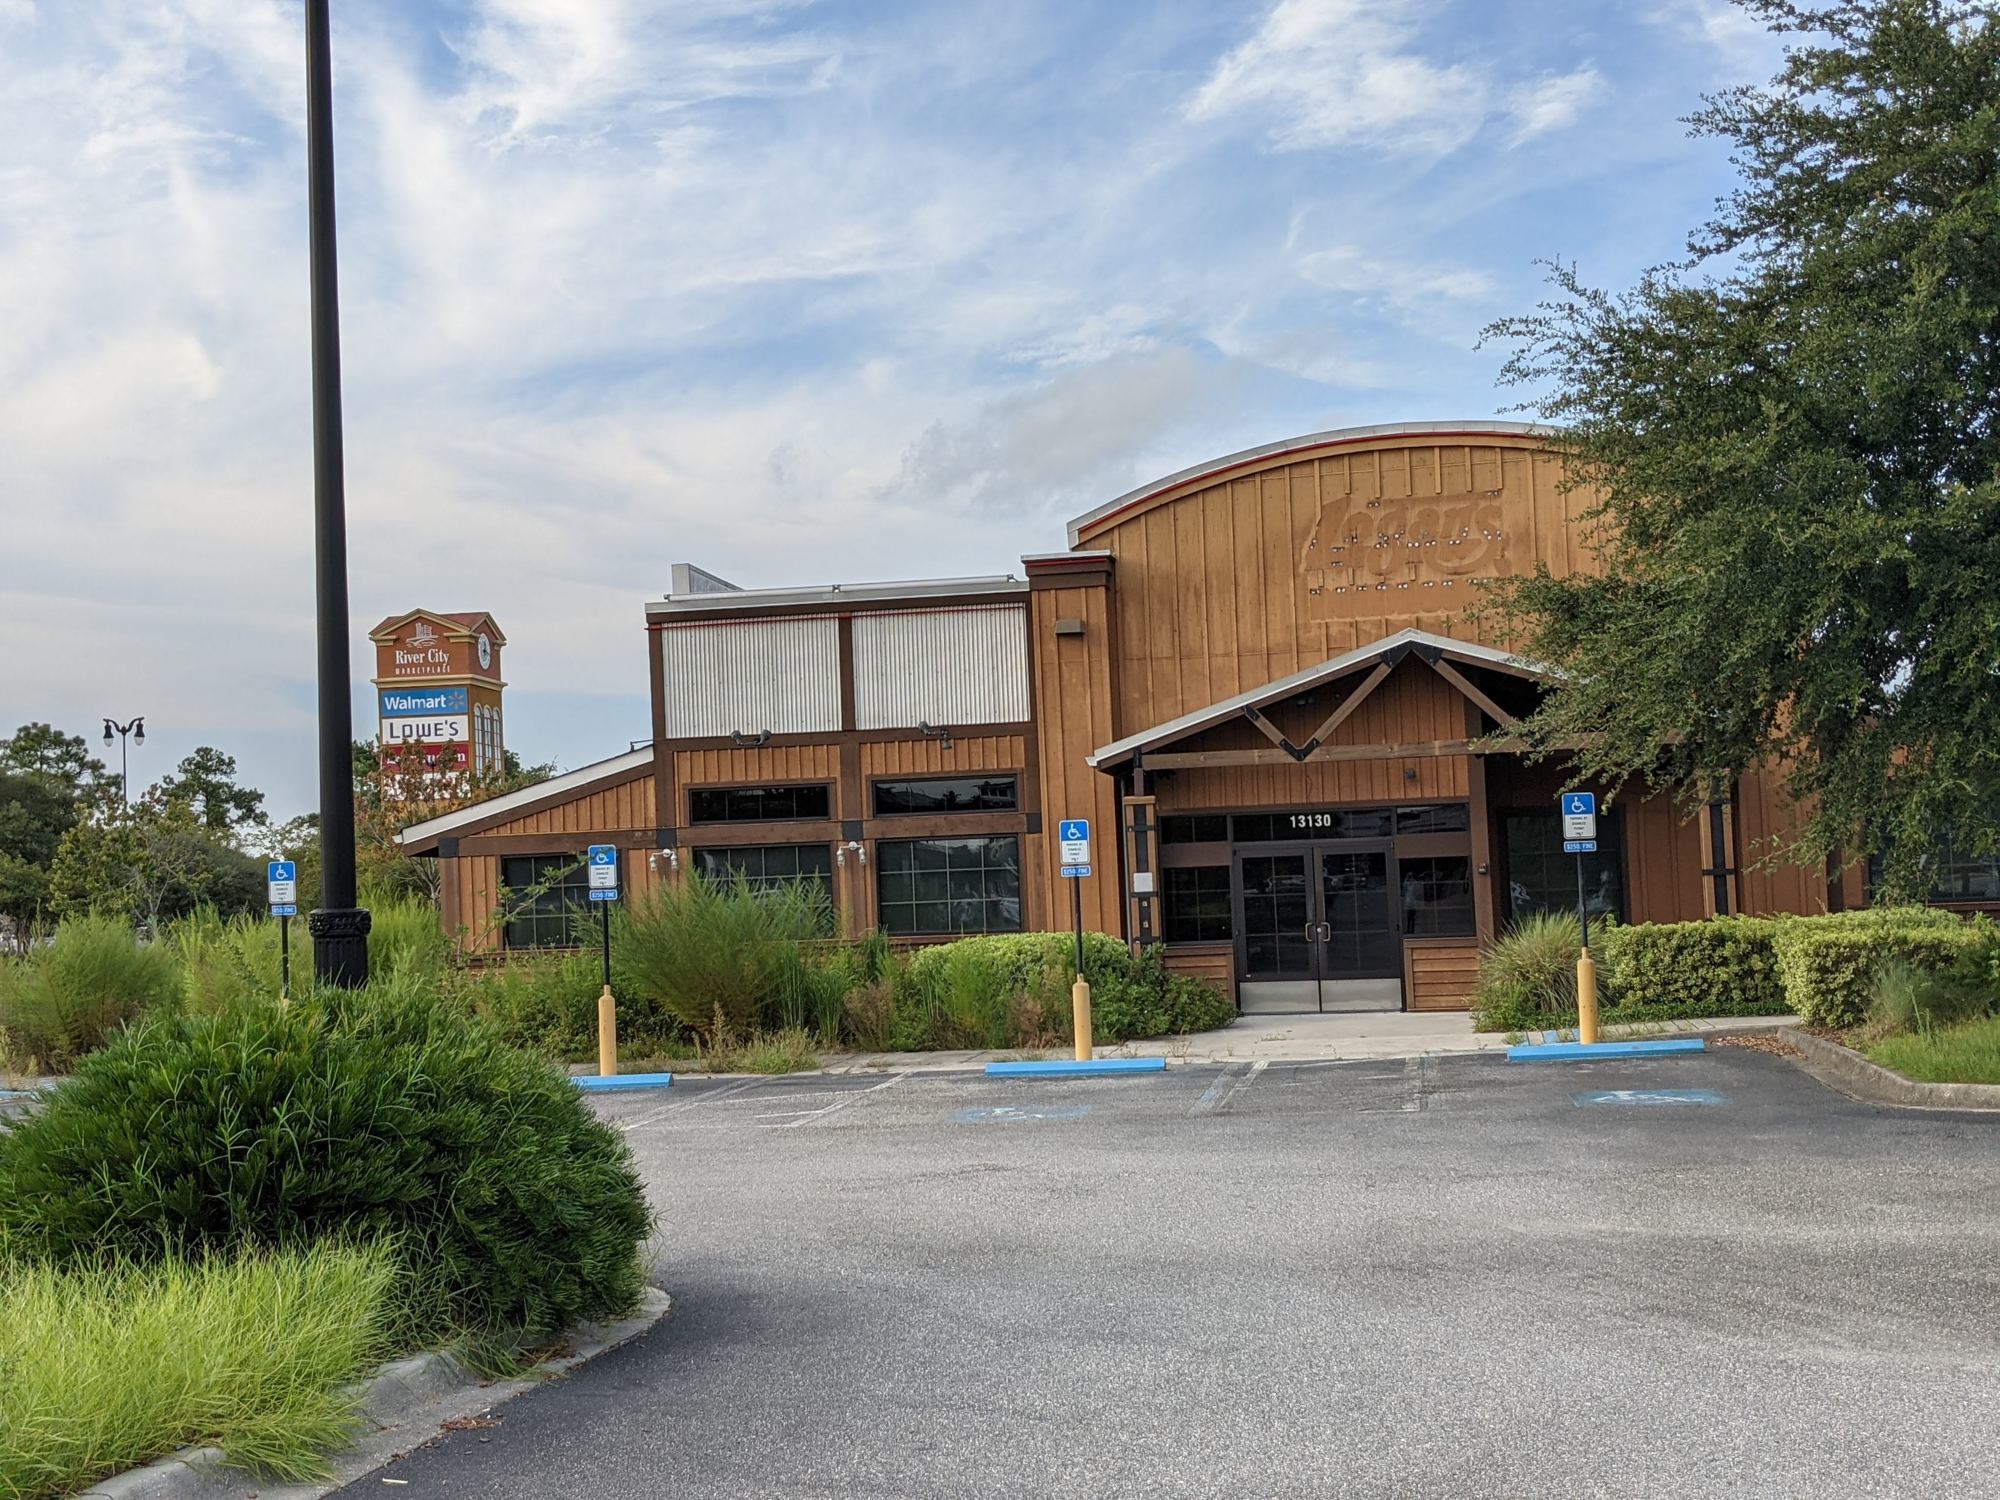 The Texas Roadhouse will replace a demolished Logan’s Roadhouse.